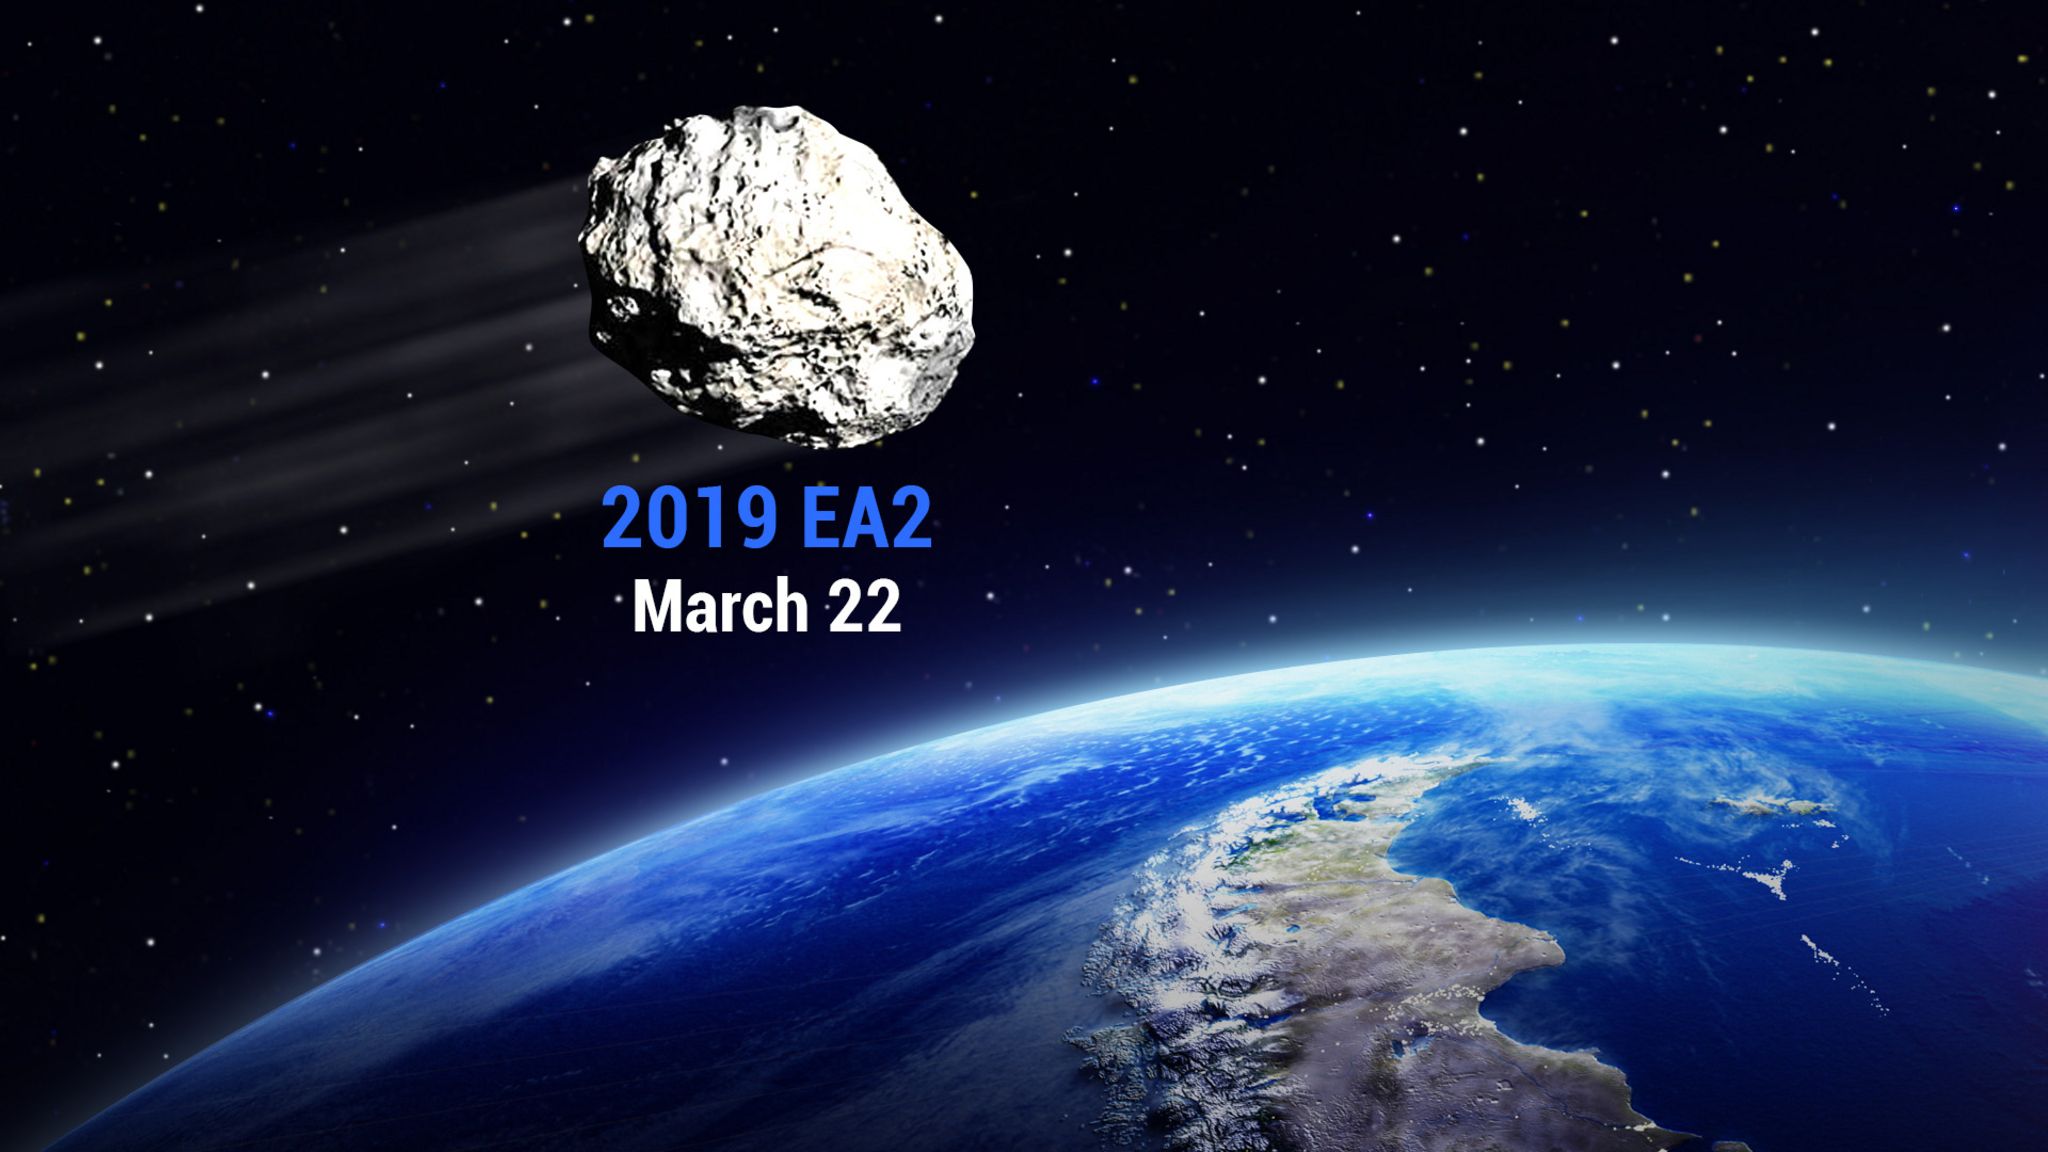 Giant Asteroid Approaches Earth2048 x 1152